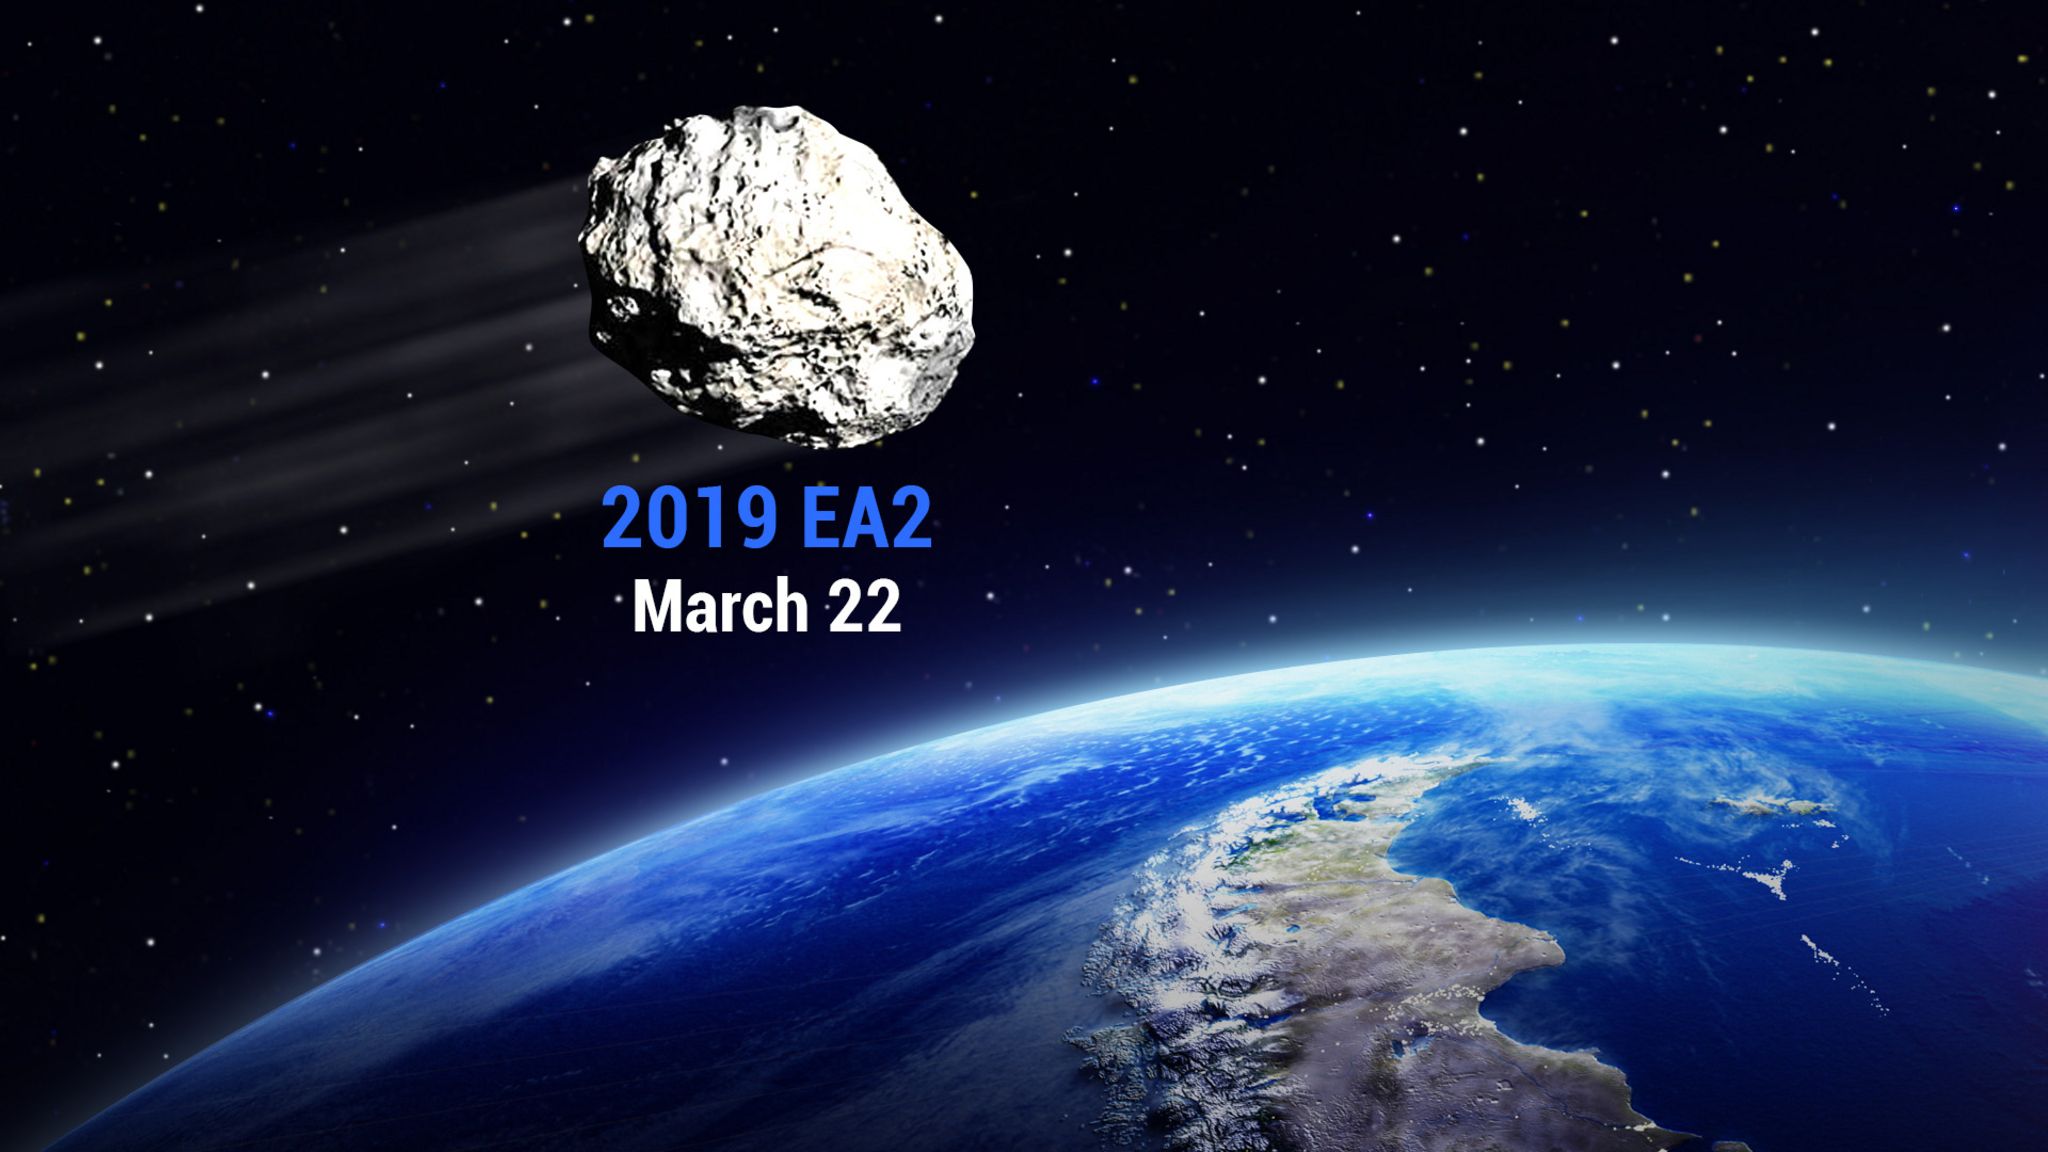 Giant Asteroid Approaches Earth2048 x 1152